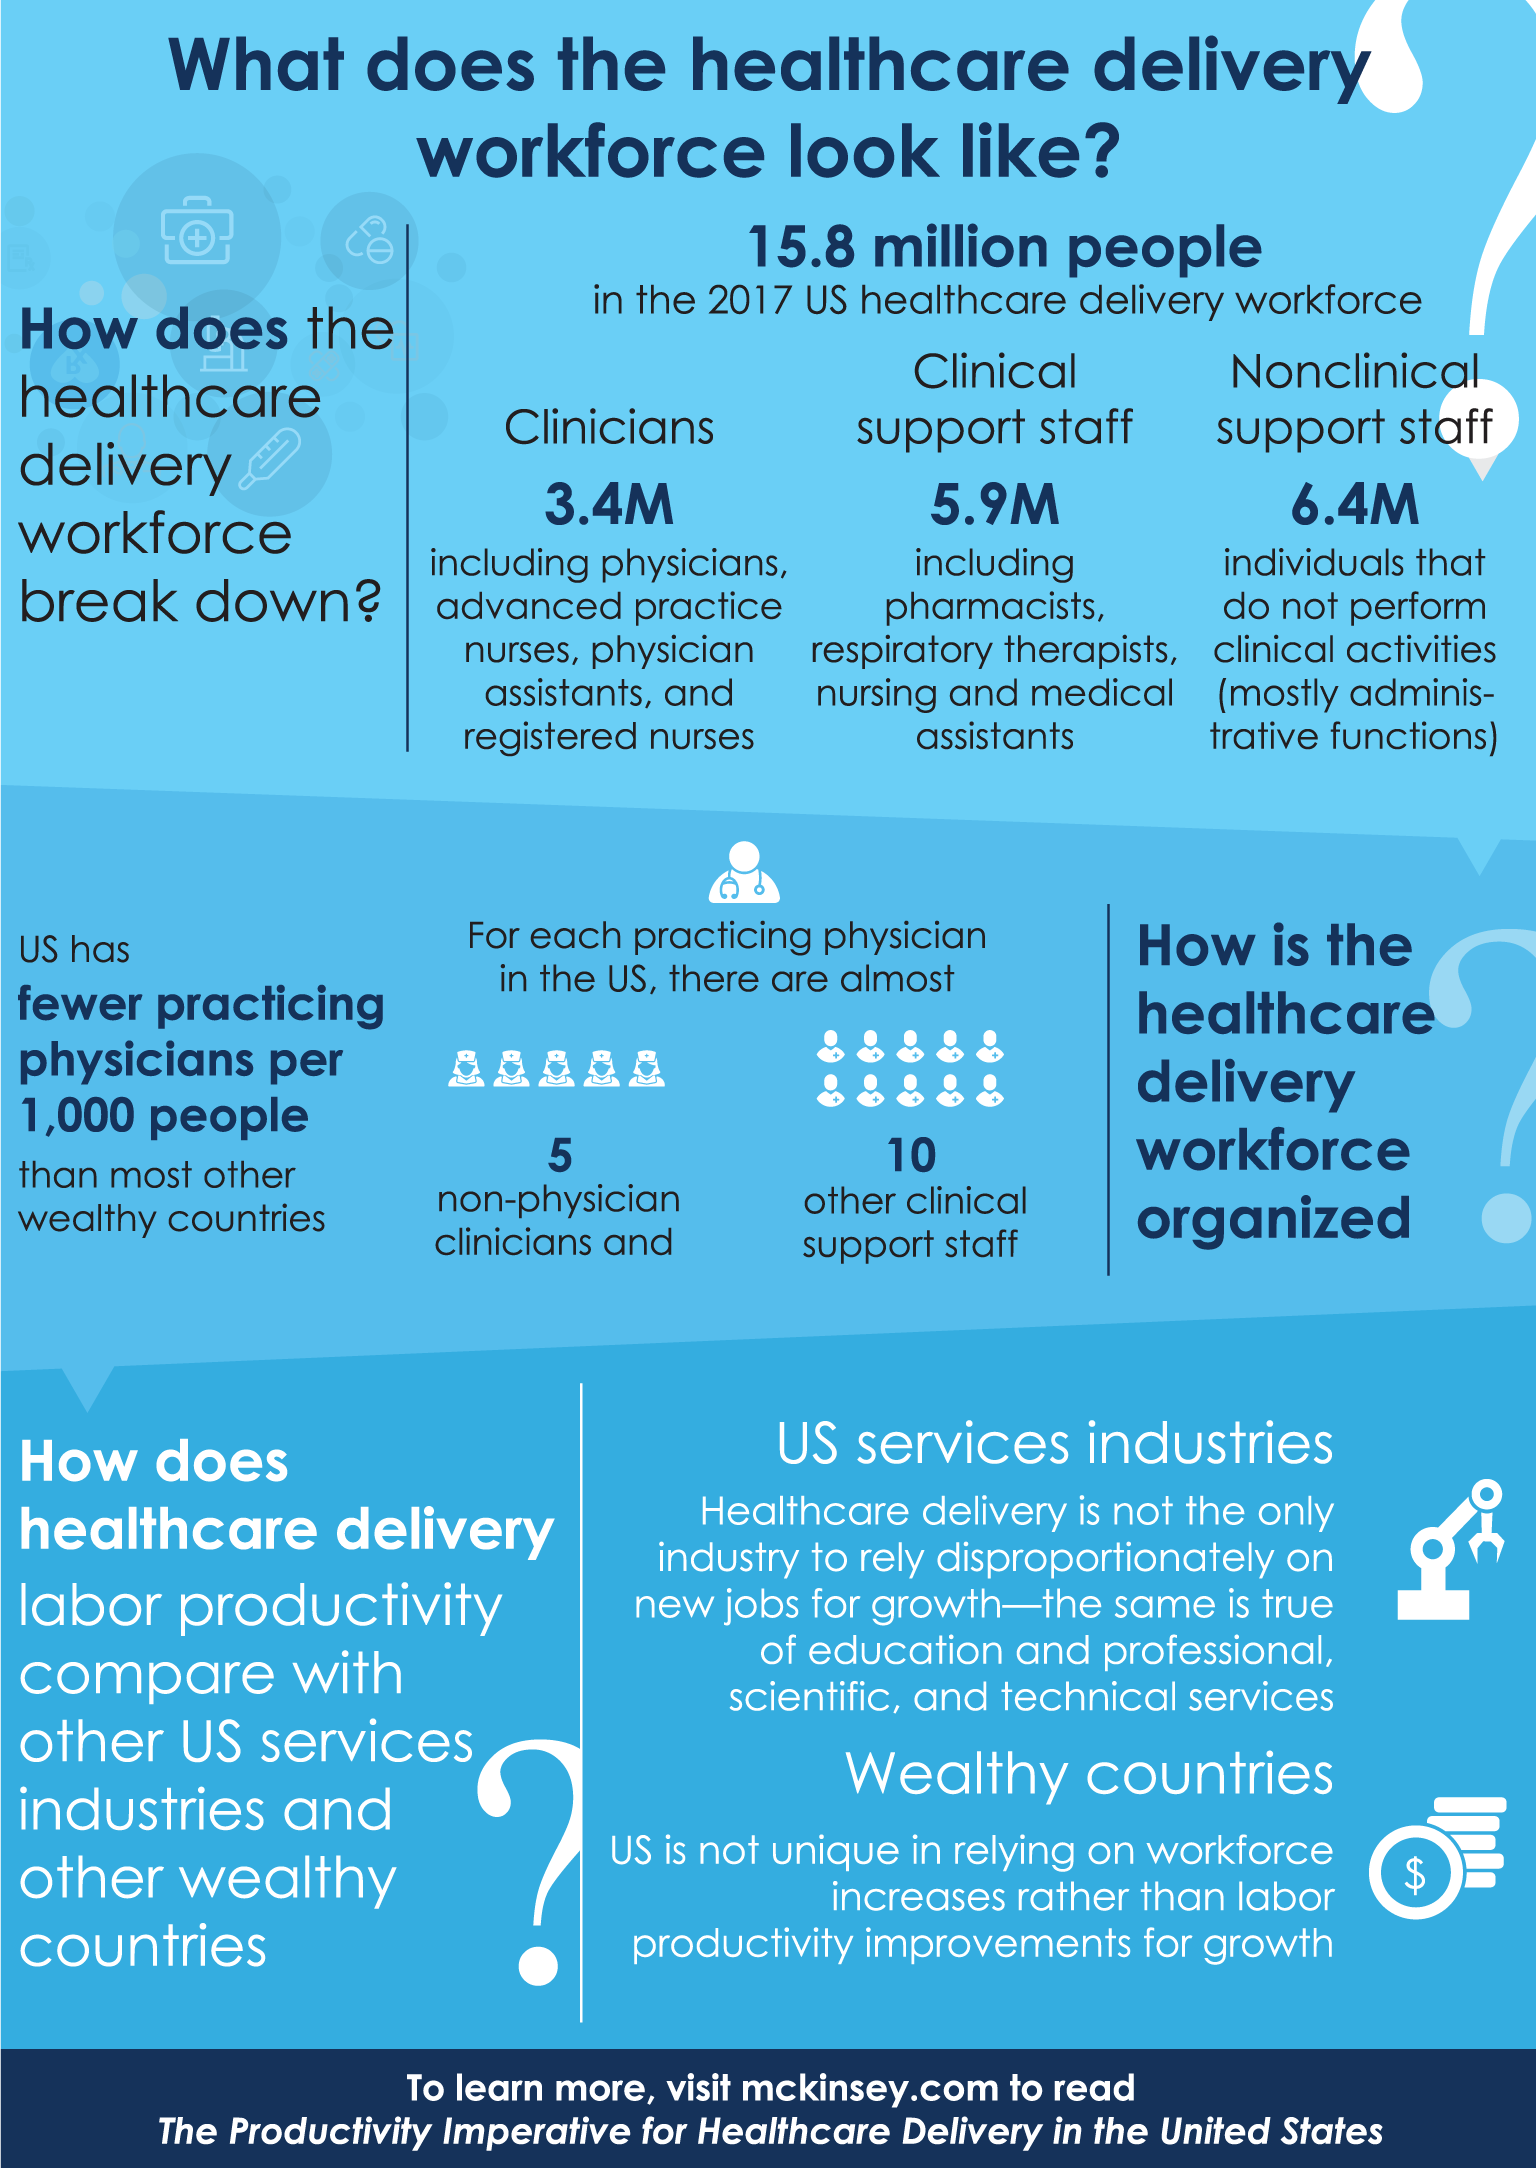 What does the healthcare delivery workforce look like?